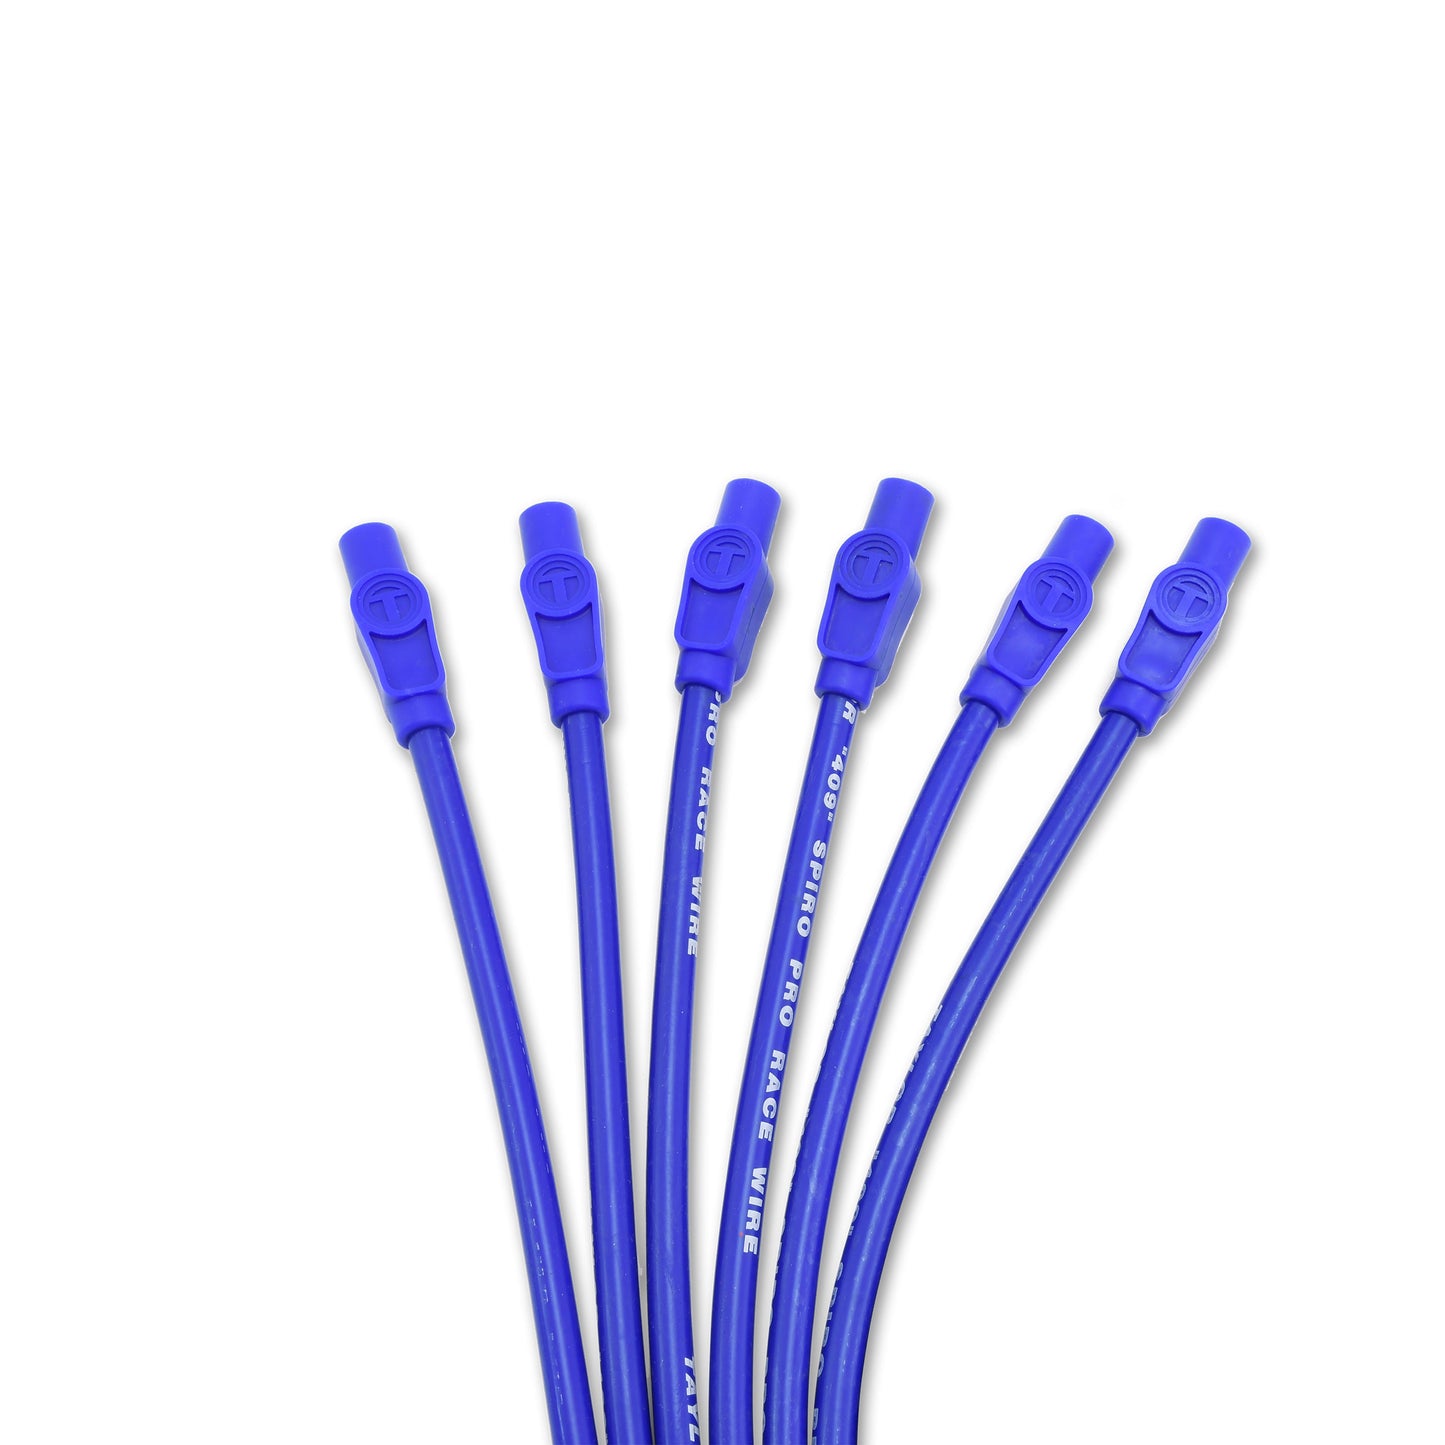 Taylor Cable 79645 10.4mm 409 Spiro-Pro univ 6 cyl 180 blue